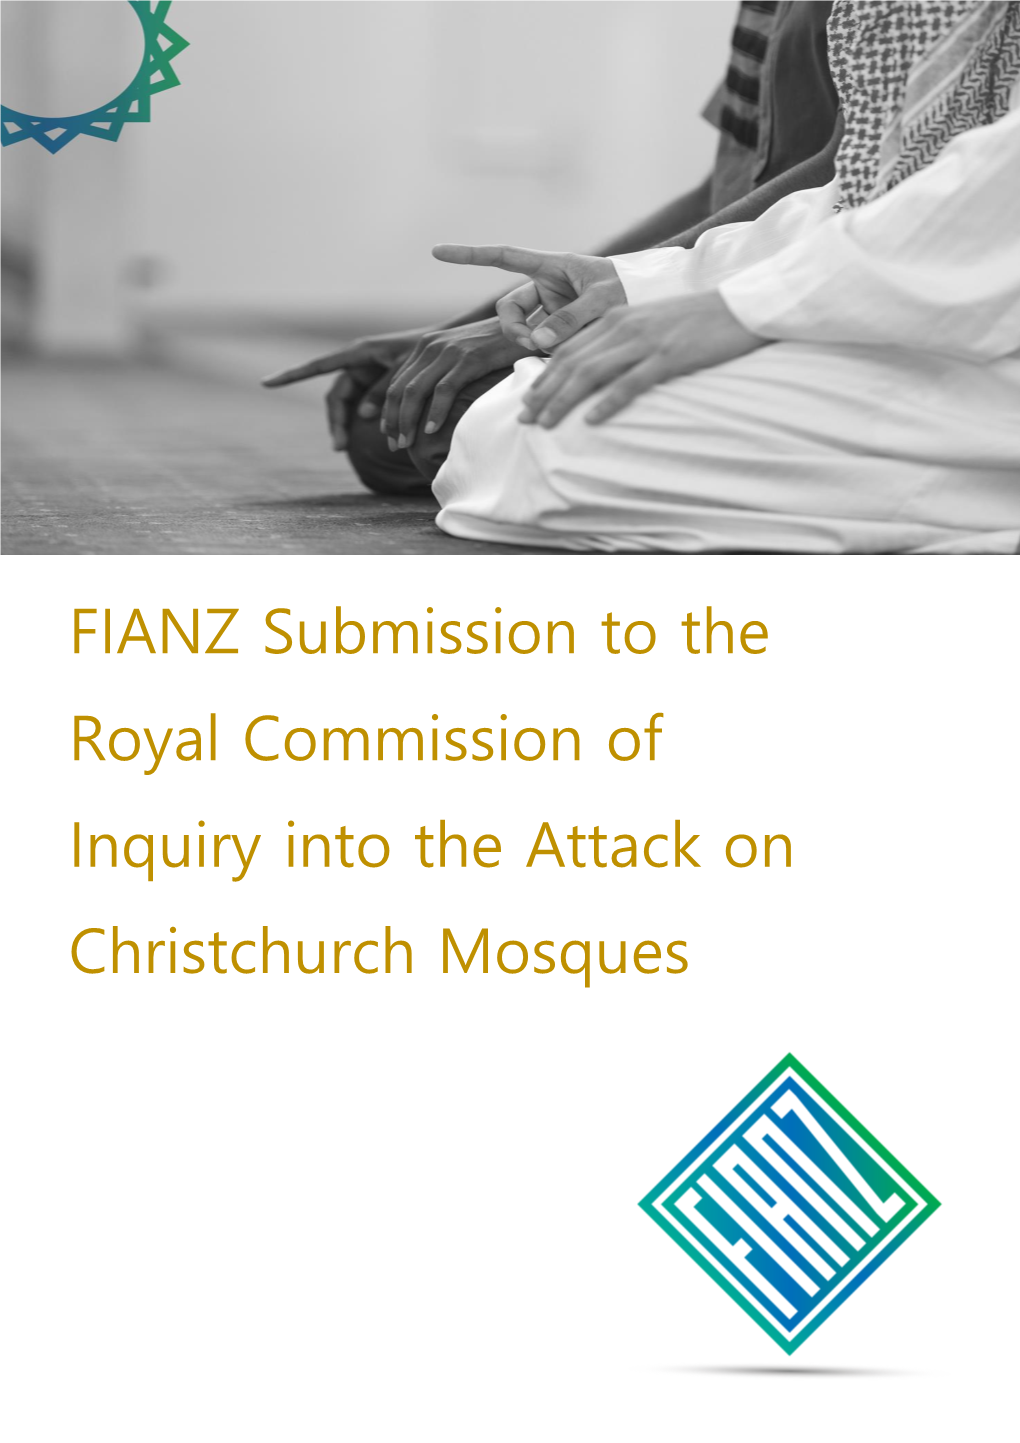 FIANZ Submission to the Royal Commission of Inquiry Into the Attack on Christchurch Mosques in the Name of God, the Most Compassionate, the Most Merciful